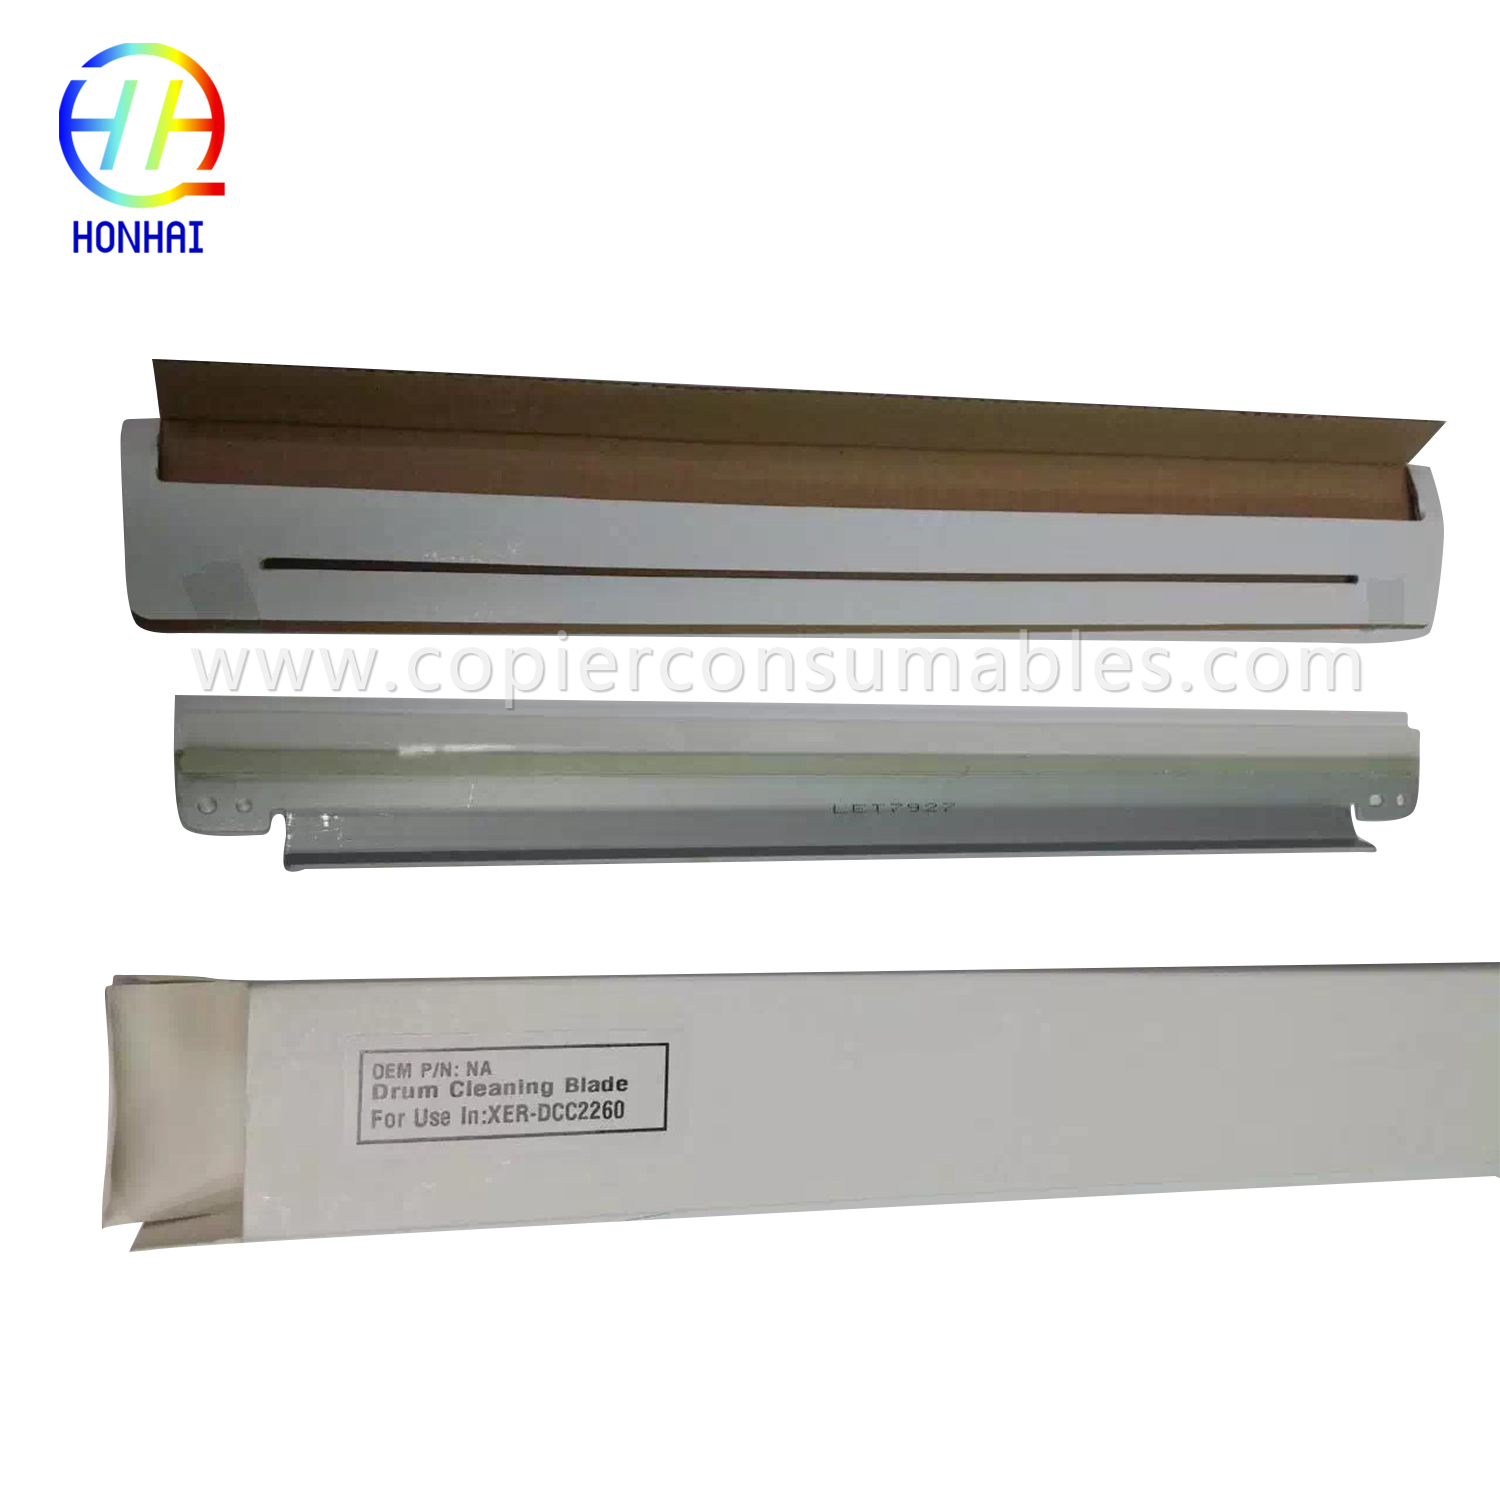 Transfer Cleaning Blade for Xerox Docucentre-IV C2260 C2263 C2265 Workcentre 7120 7125 7220 7225  (3)